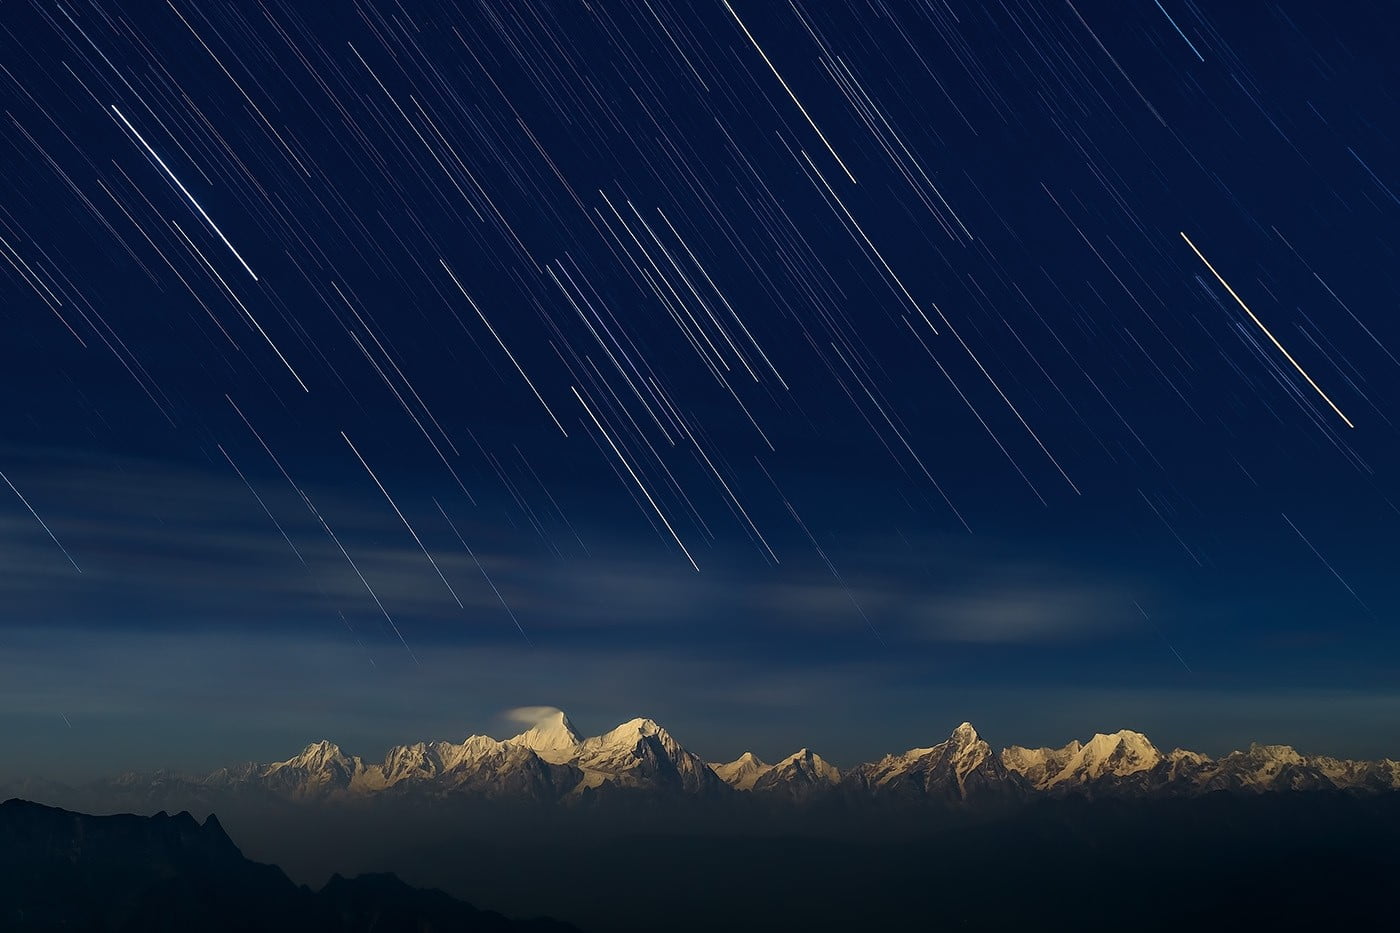 meteor shower on mountains, photography, landscape, nature, stars